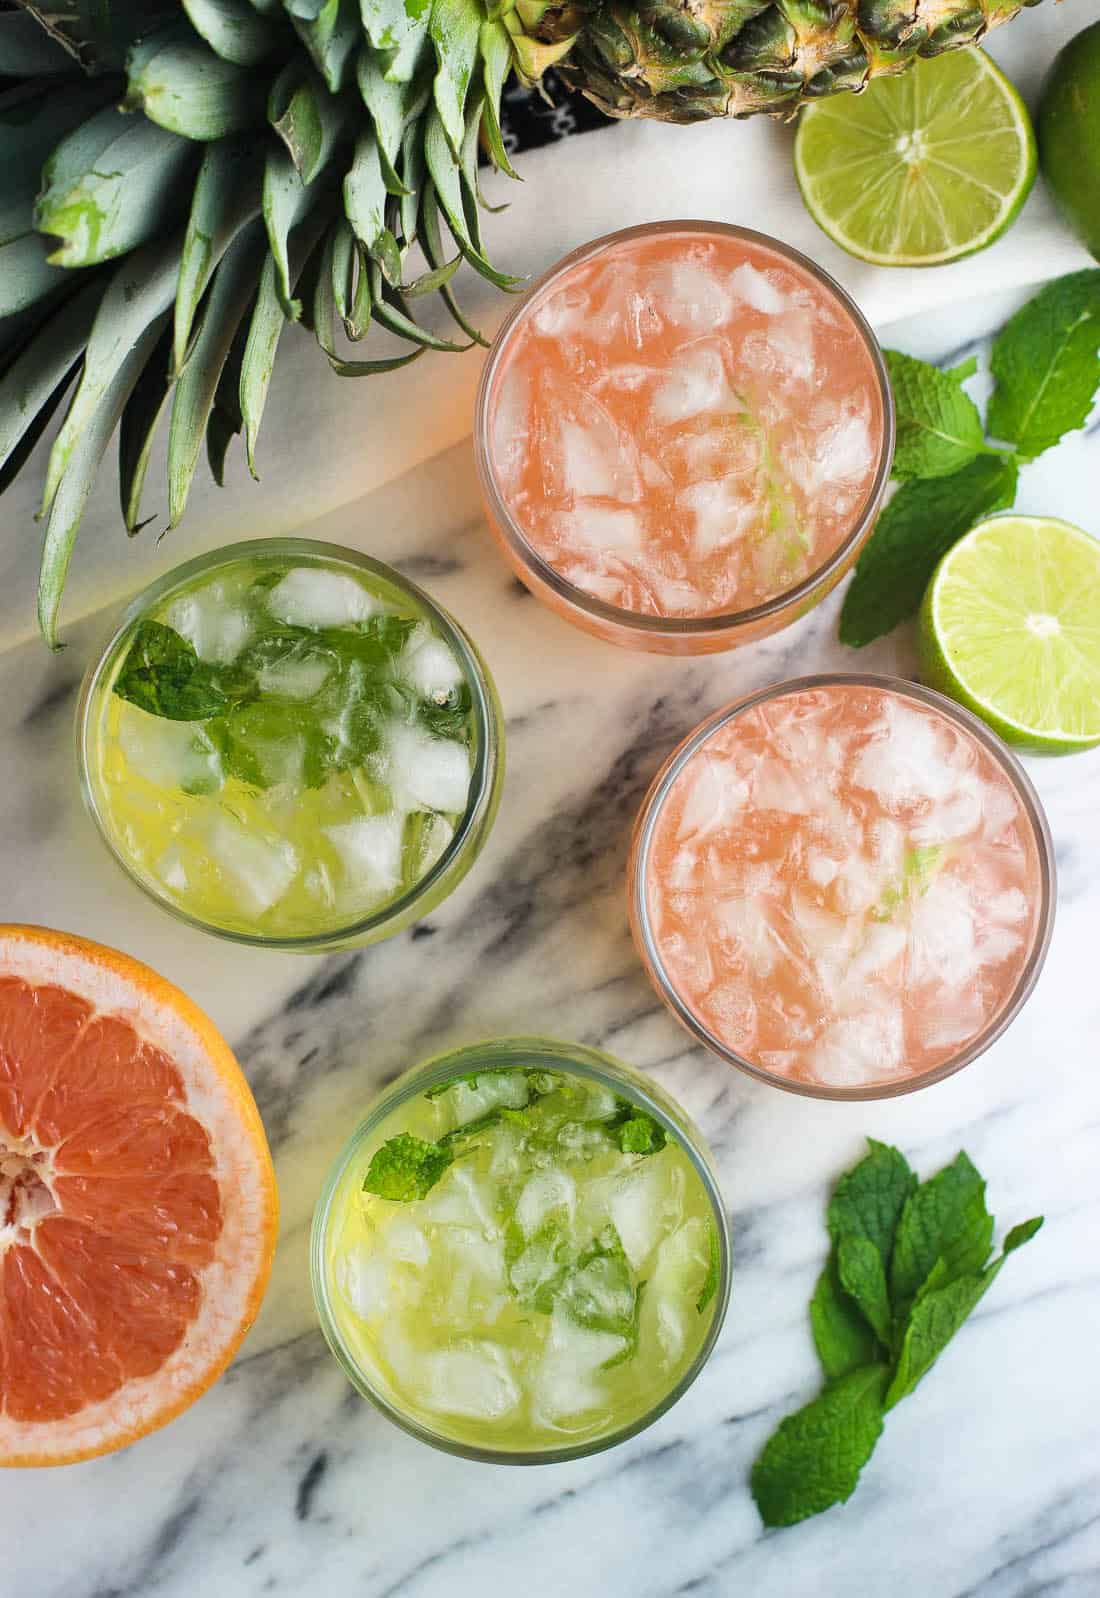 Four vodka sodas (two grapefruit, two pineapple) in small glasses surrounded by fruit.